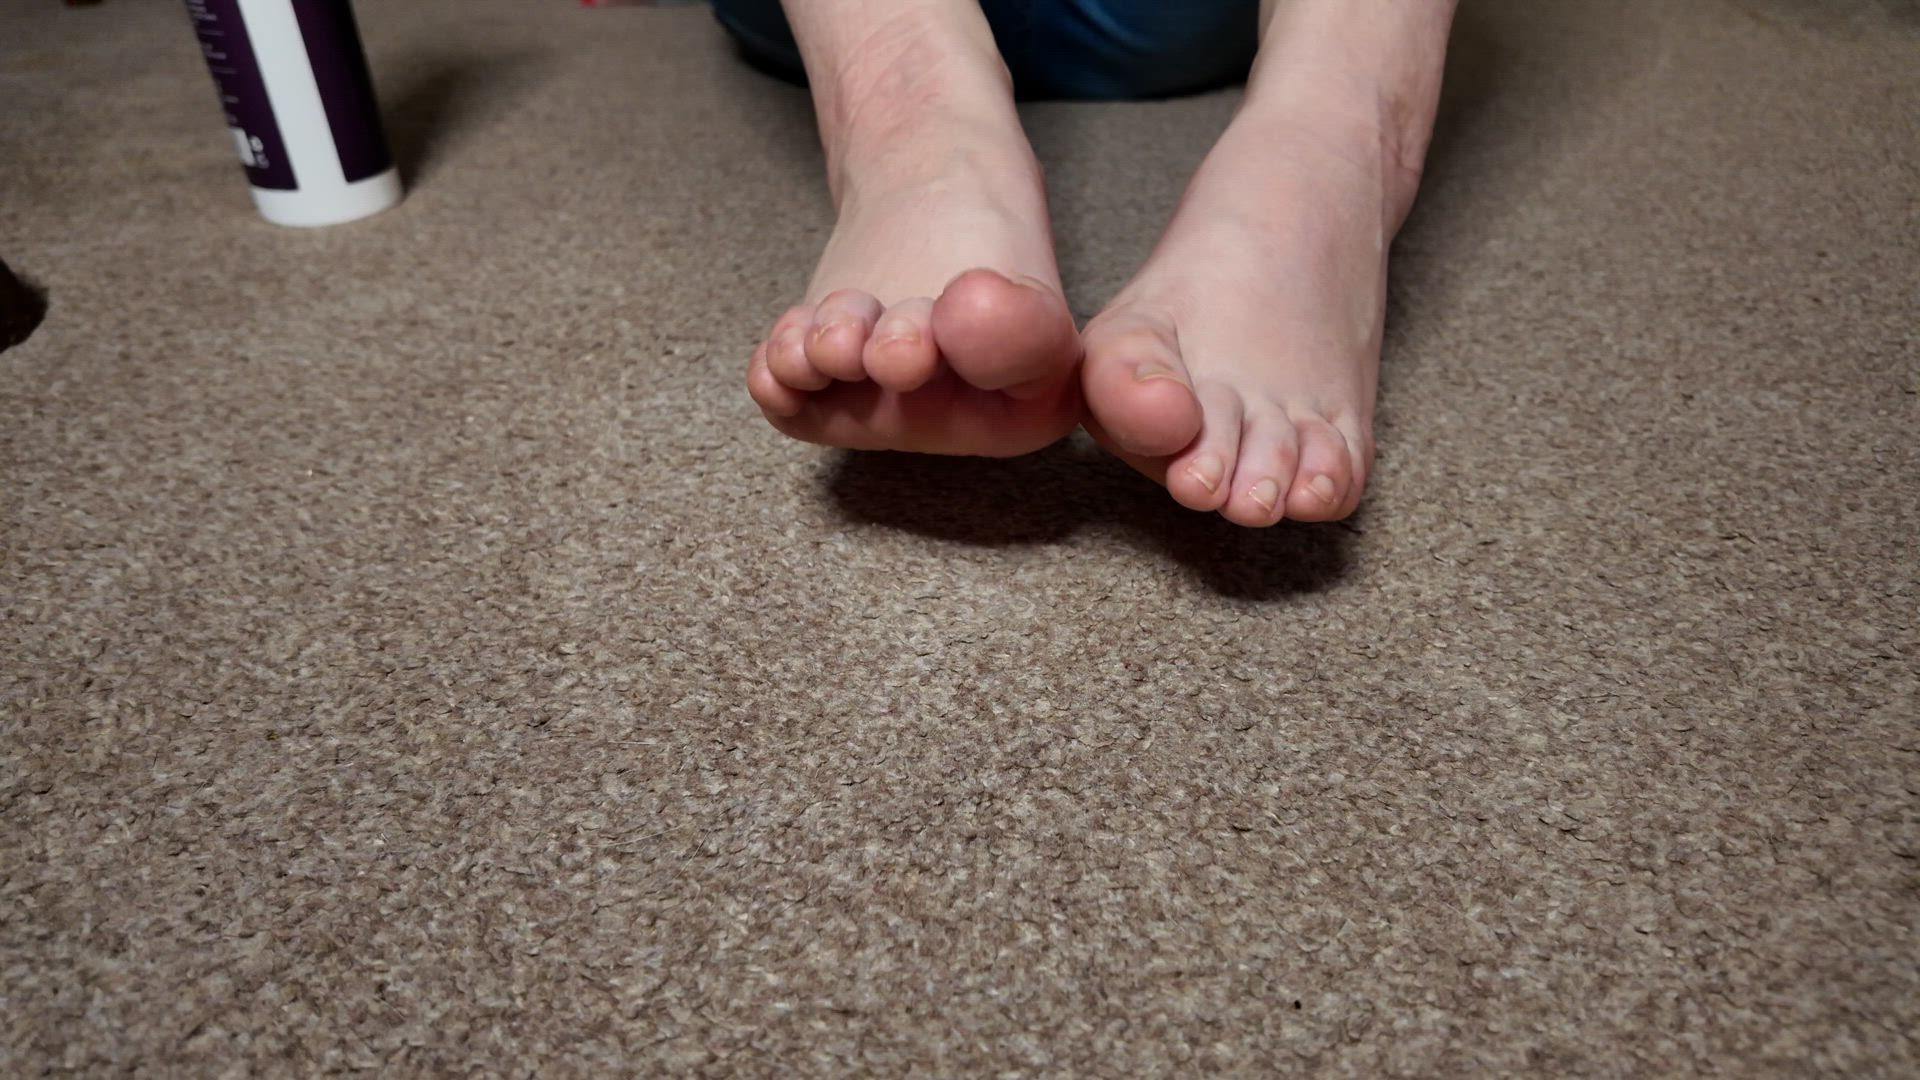 Feet porn video with onlyfans model daintyfootjobs <strong>@daintyfootjobs</strong>